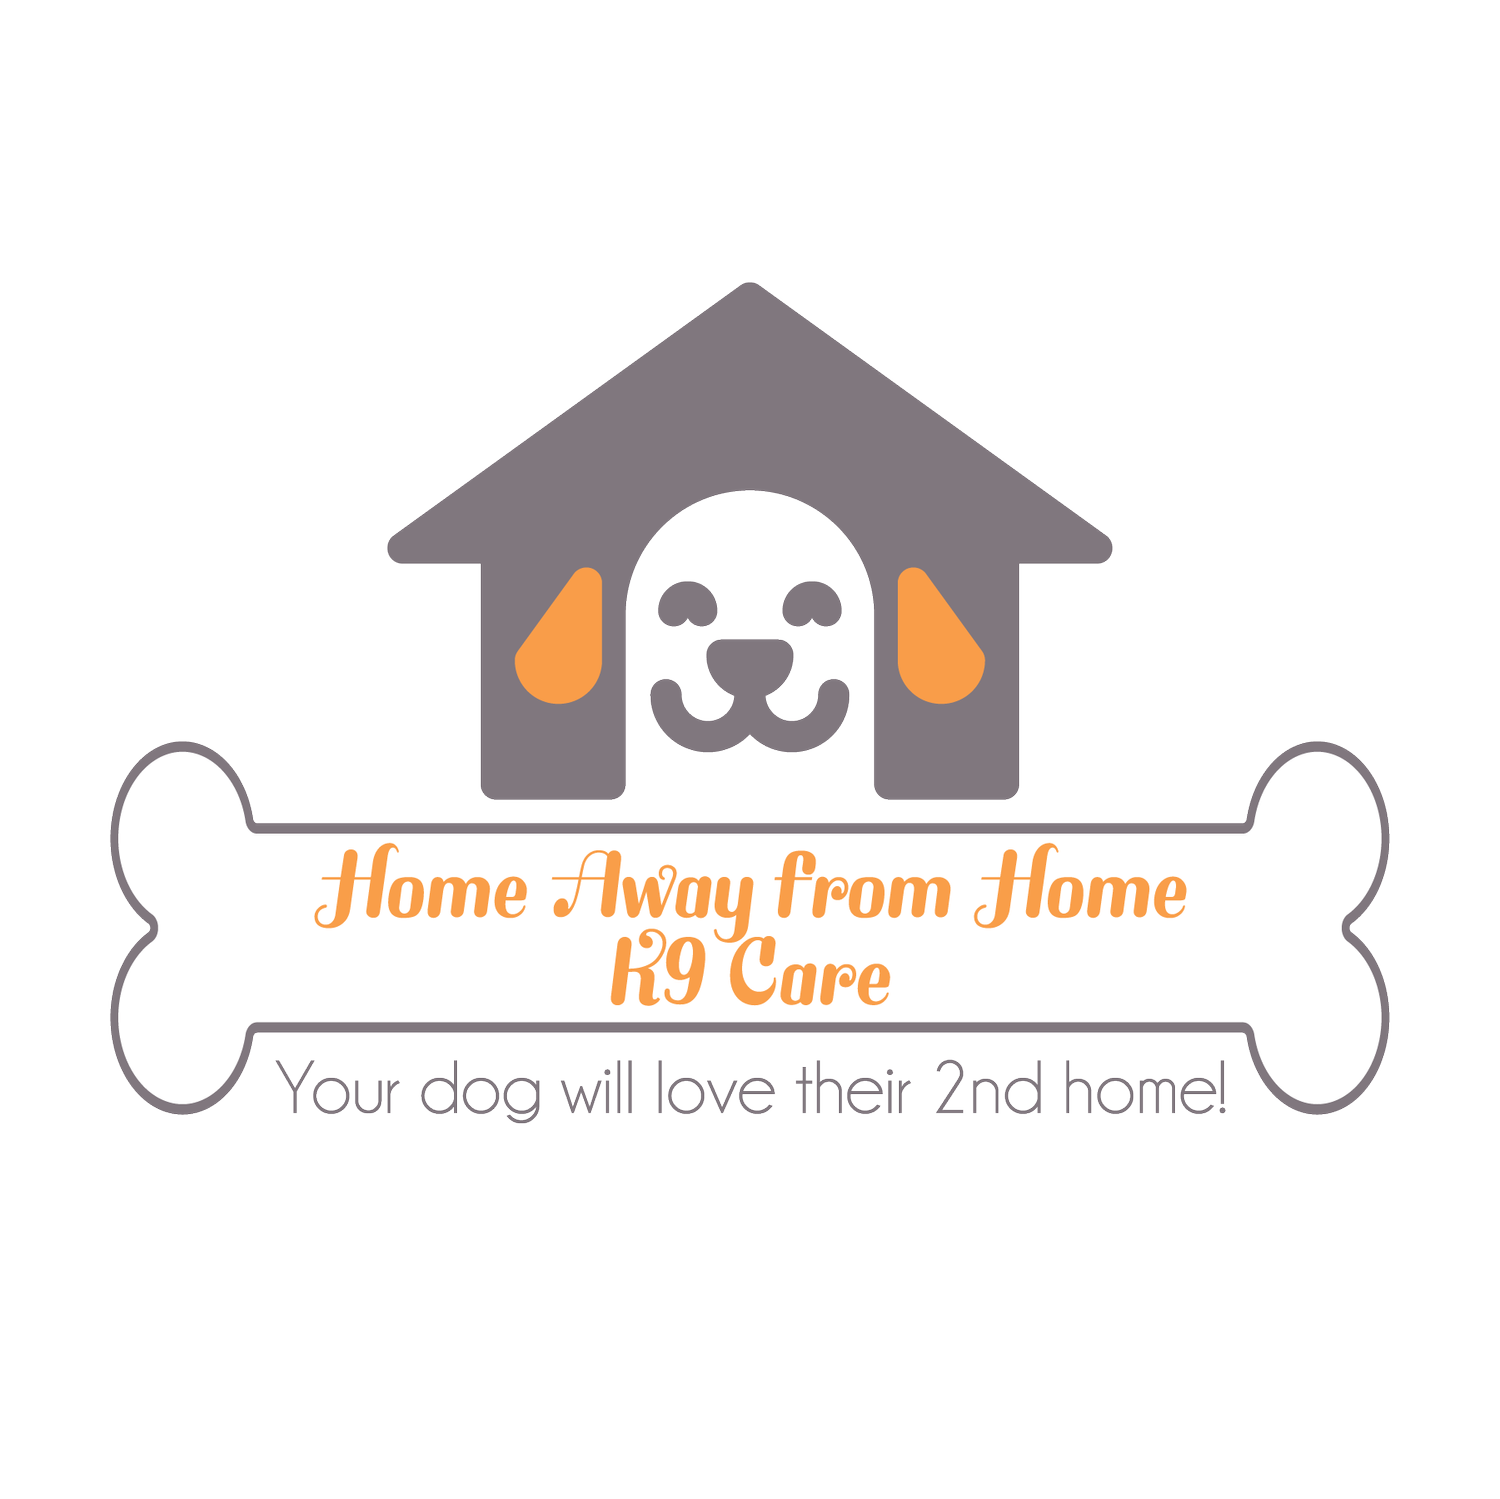 Home Away From Home K9 Care